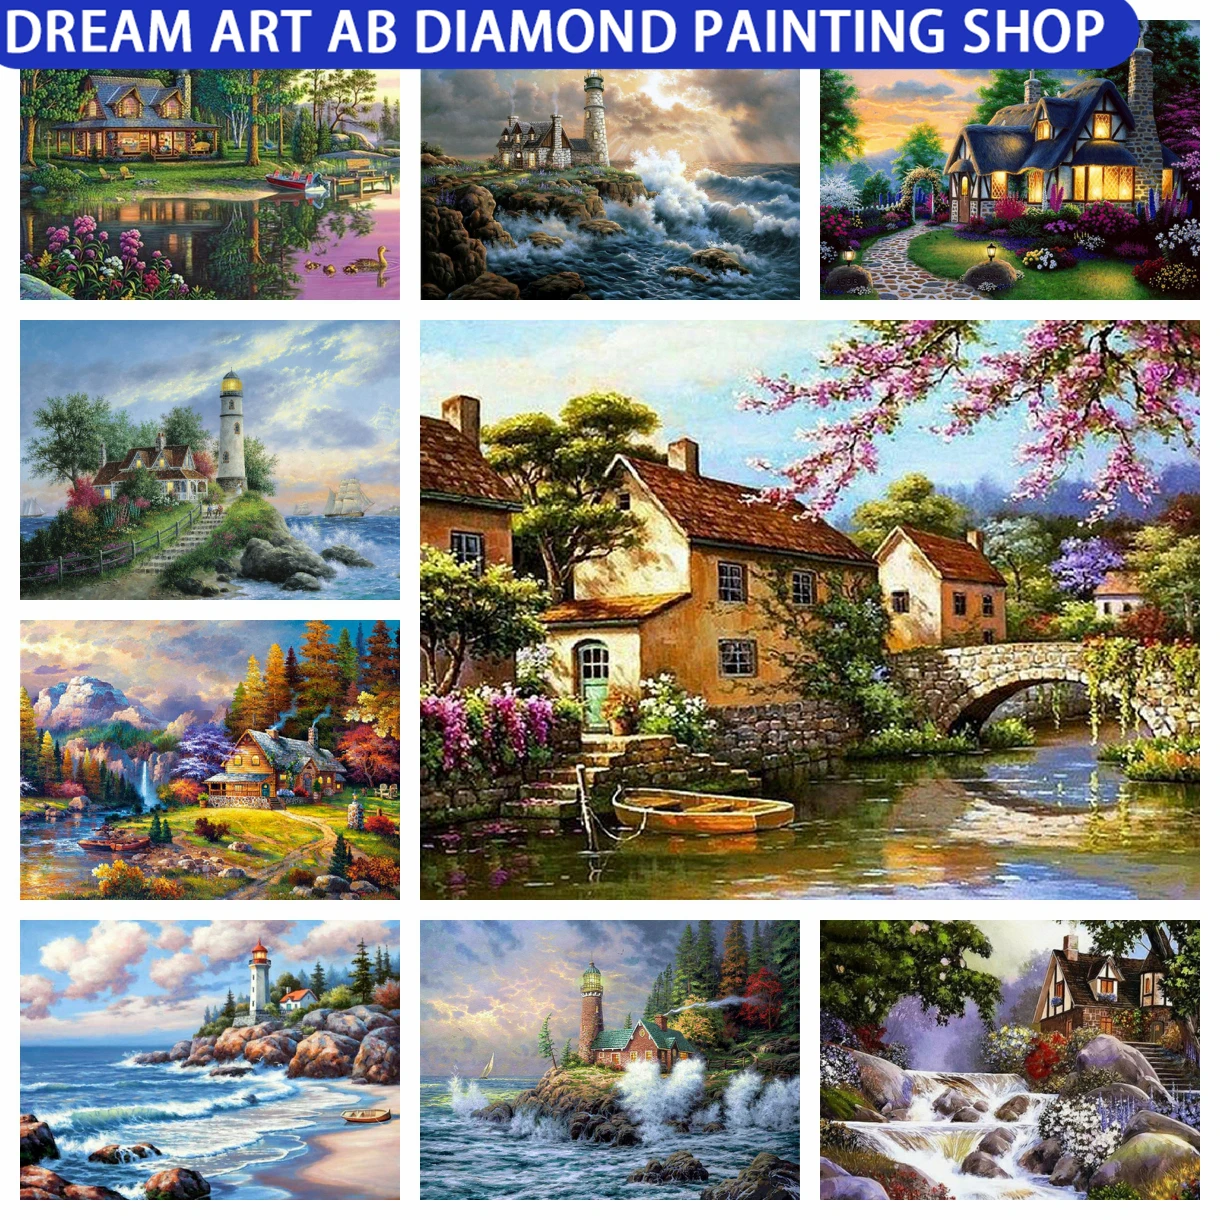 

5D Villa Scenery Art Diamond Painting Forest Stream AB Full Drill Resin Mosaic Diamond Embroidery Home DIY Decoration Gift